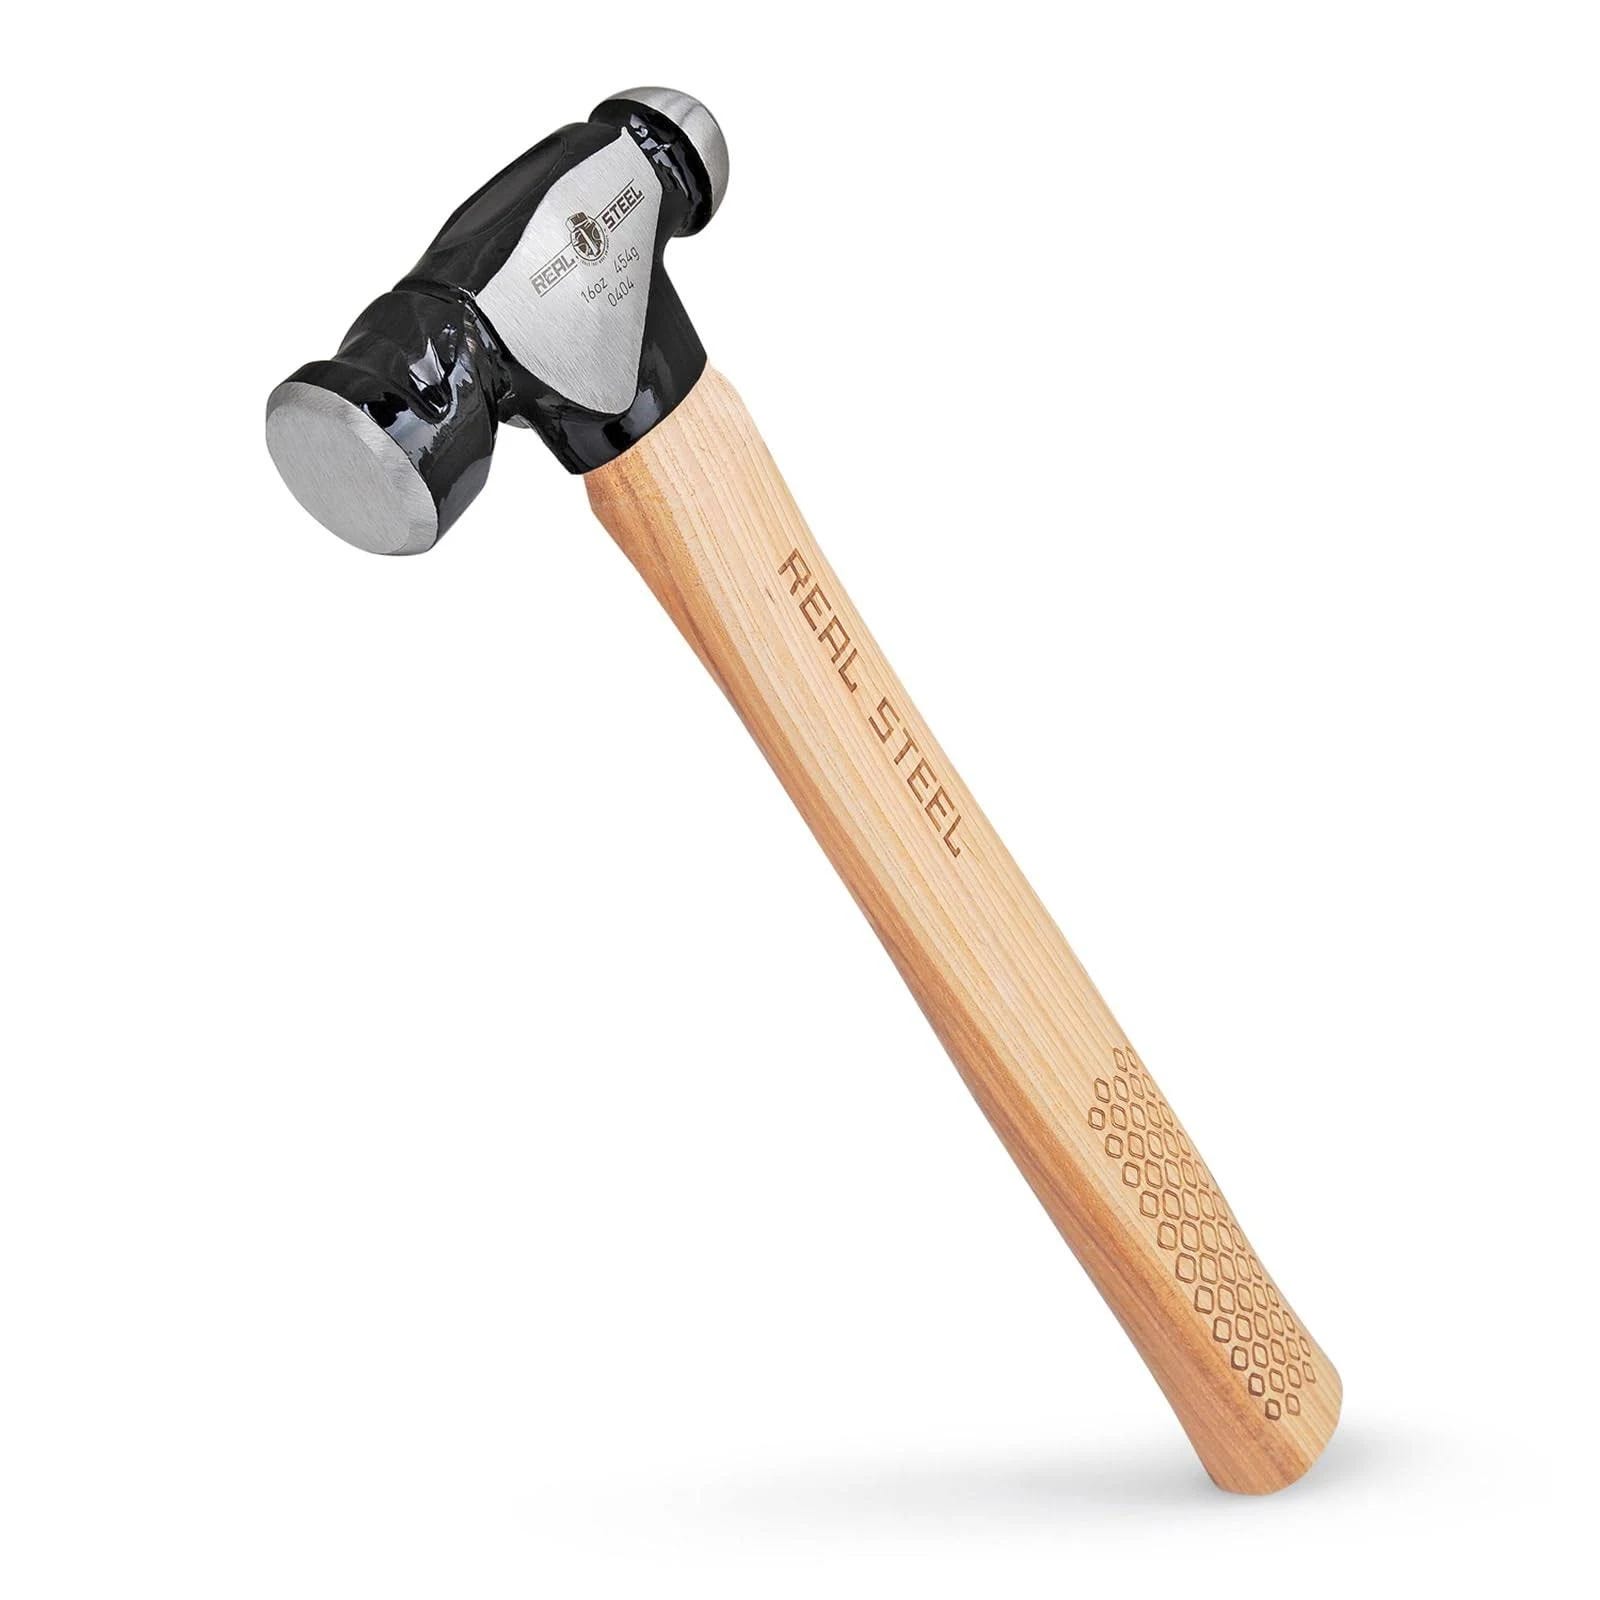 Real Steel Genuine Hickory Wood Handle Ball Pein Hammer with Forged Steel Head (16 Ounces) | Image